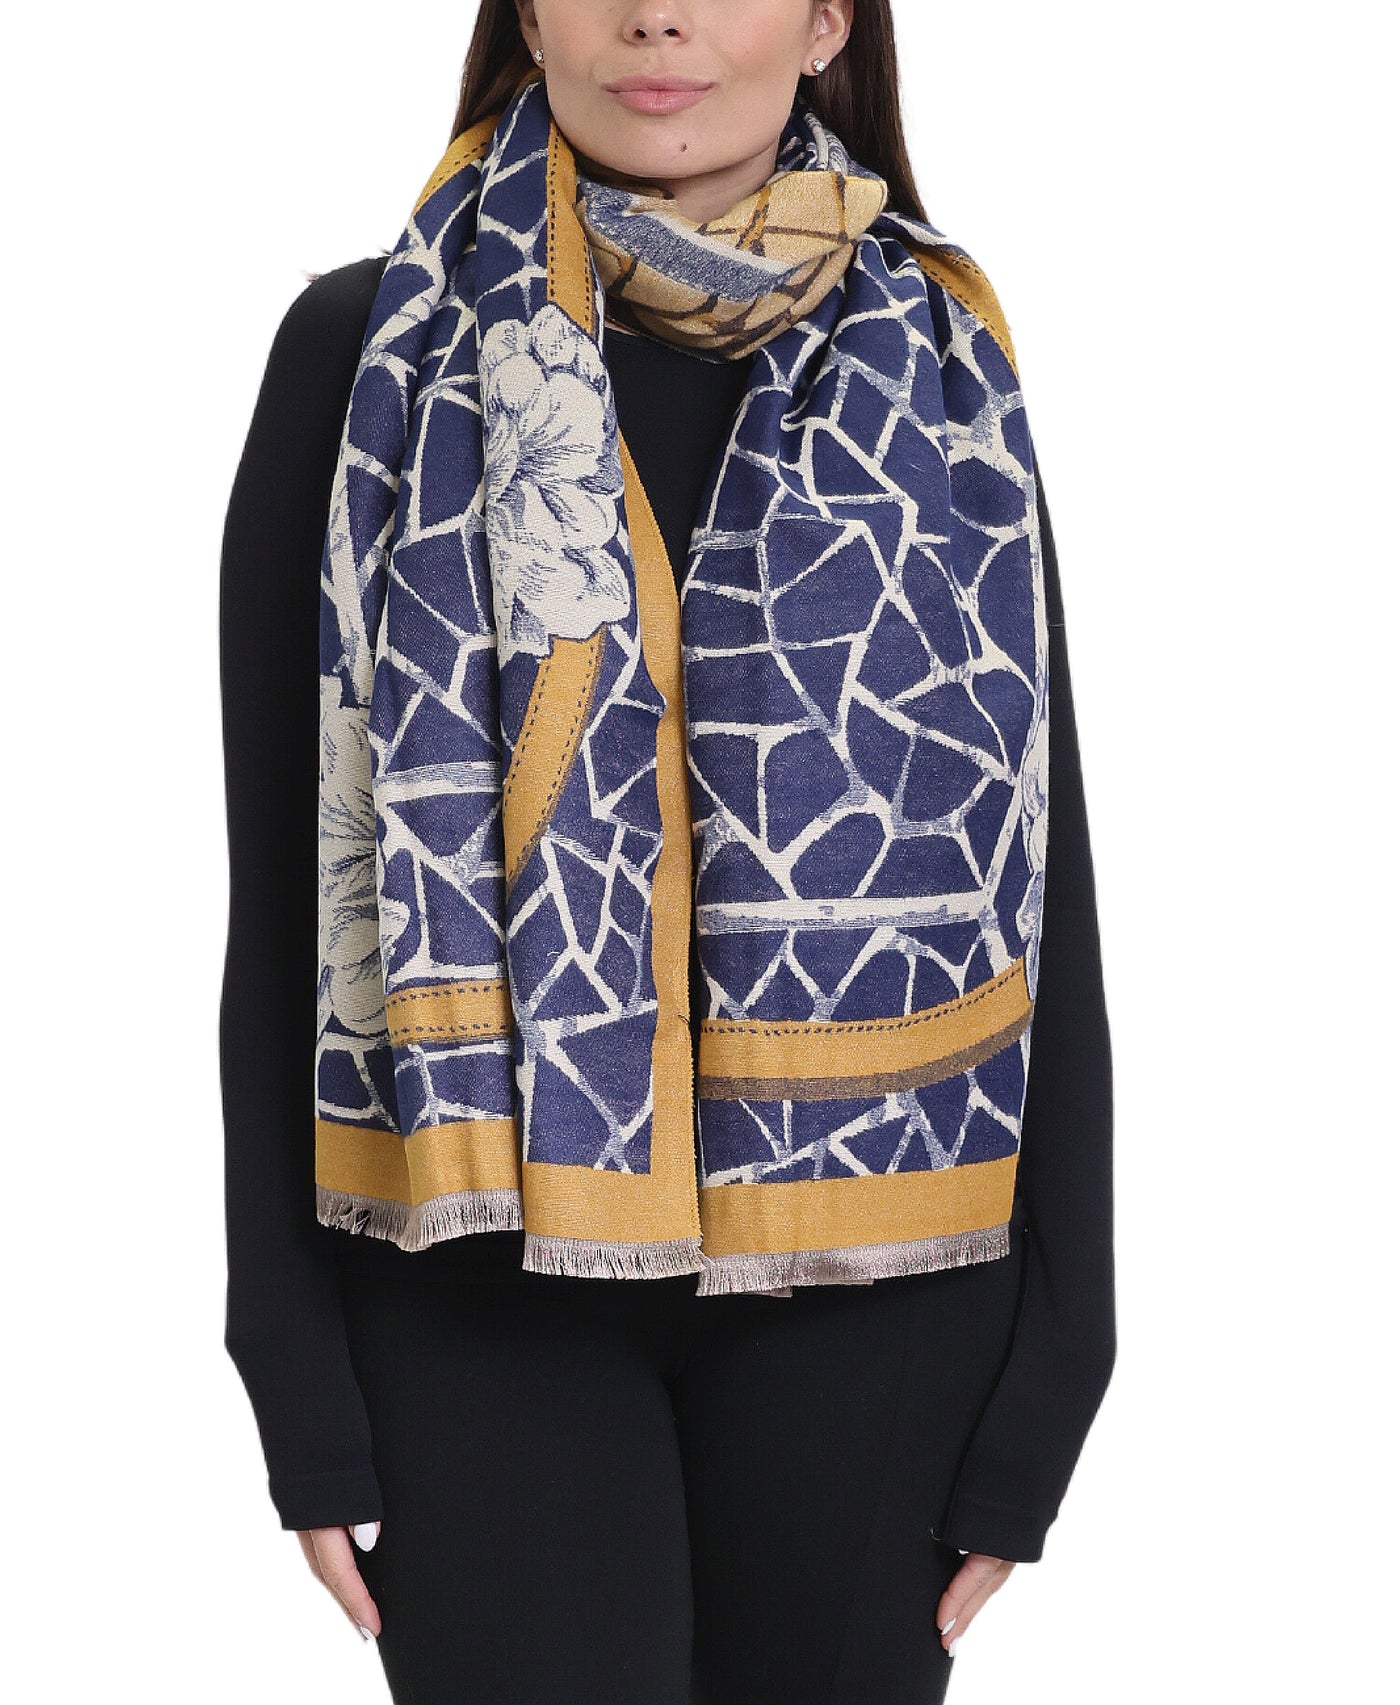 Abstract Floral Print Scarf/Wrap image 1